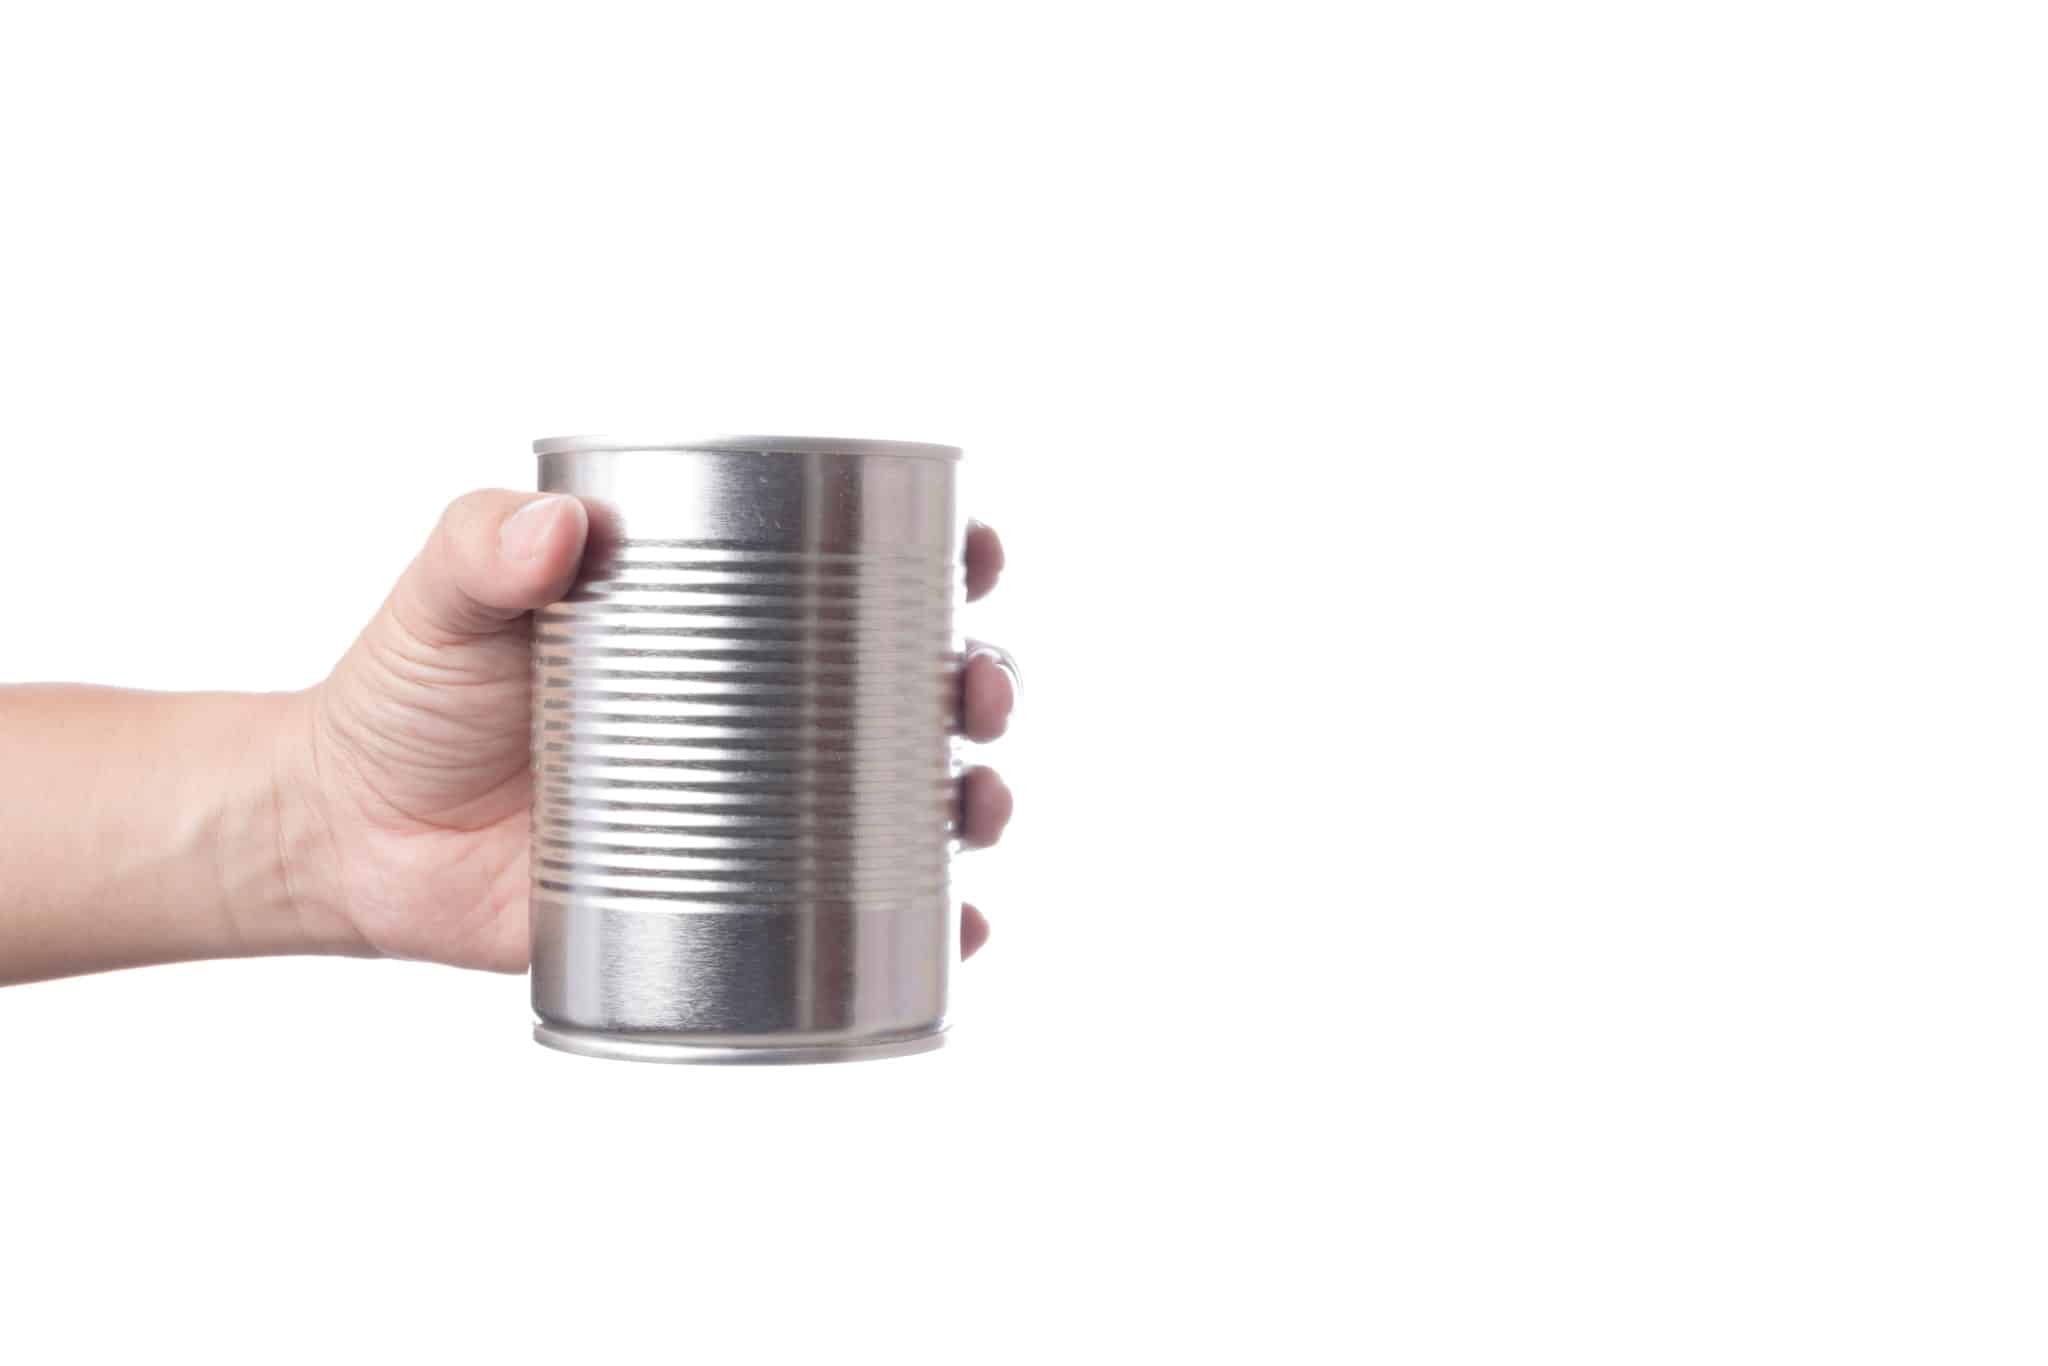 Hand holding aluminum soup can on white background